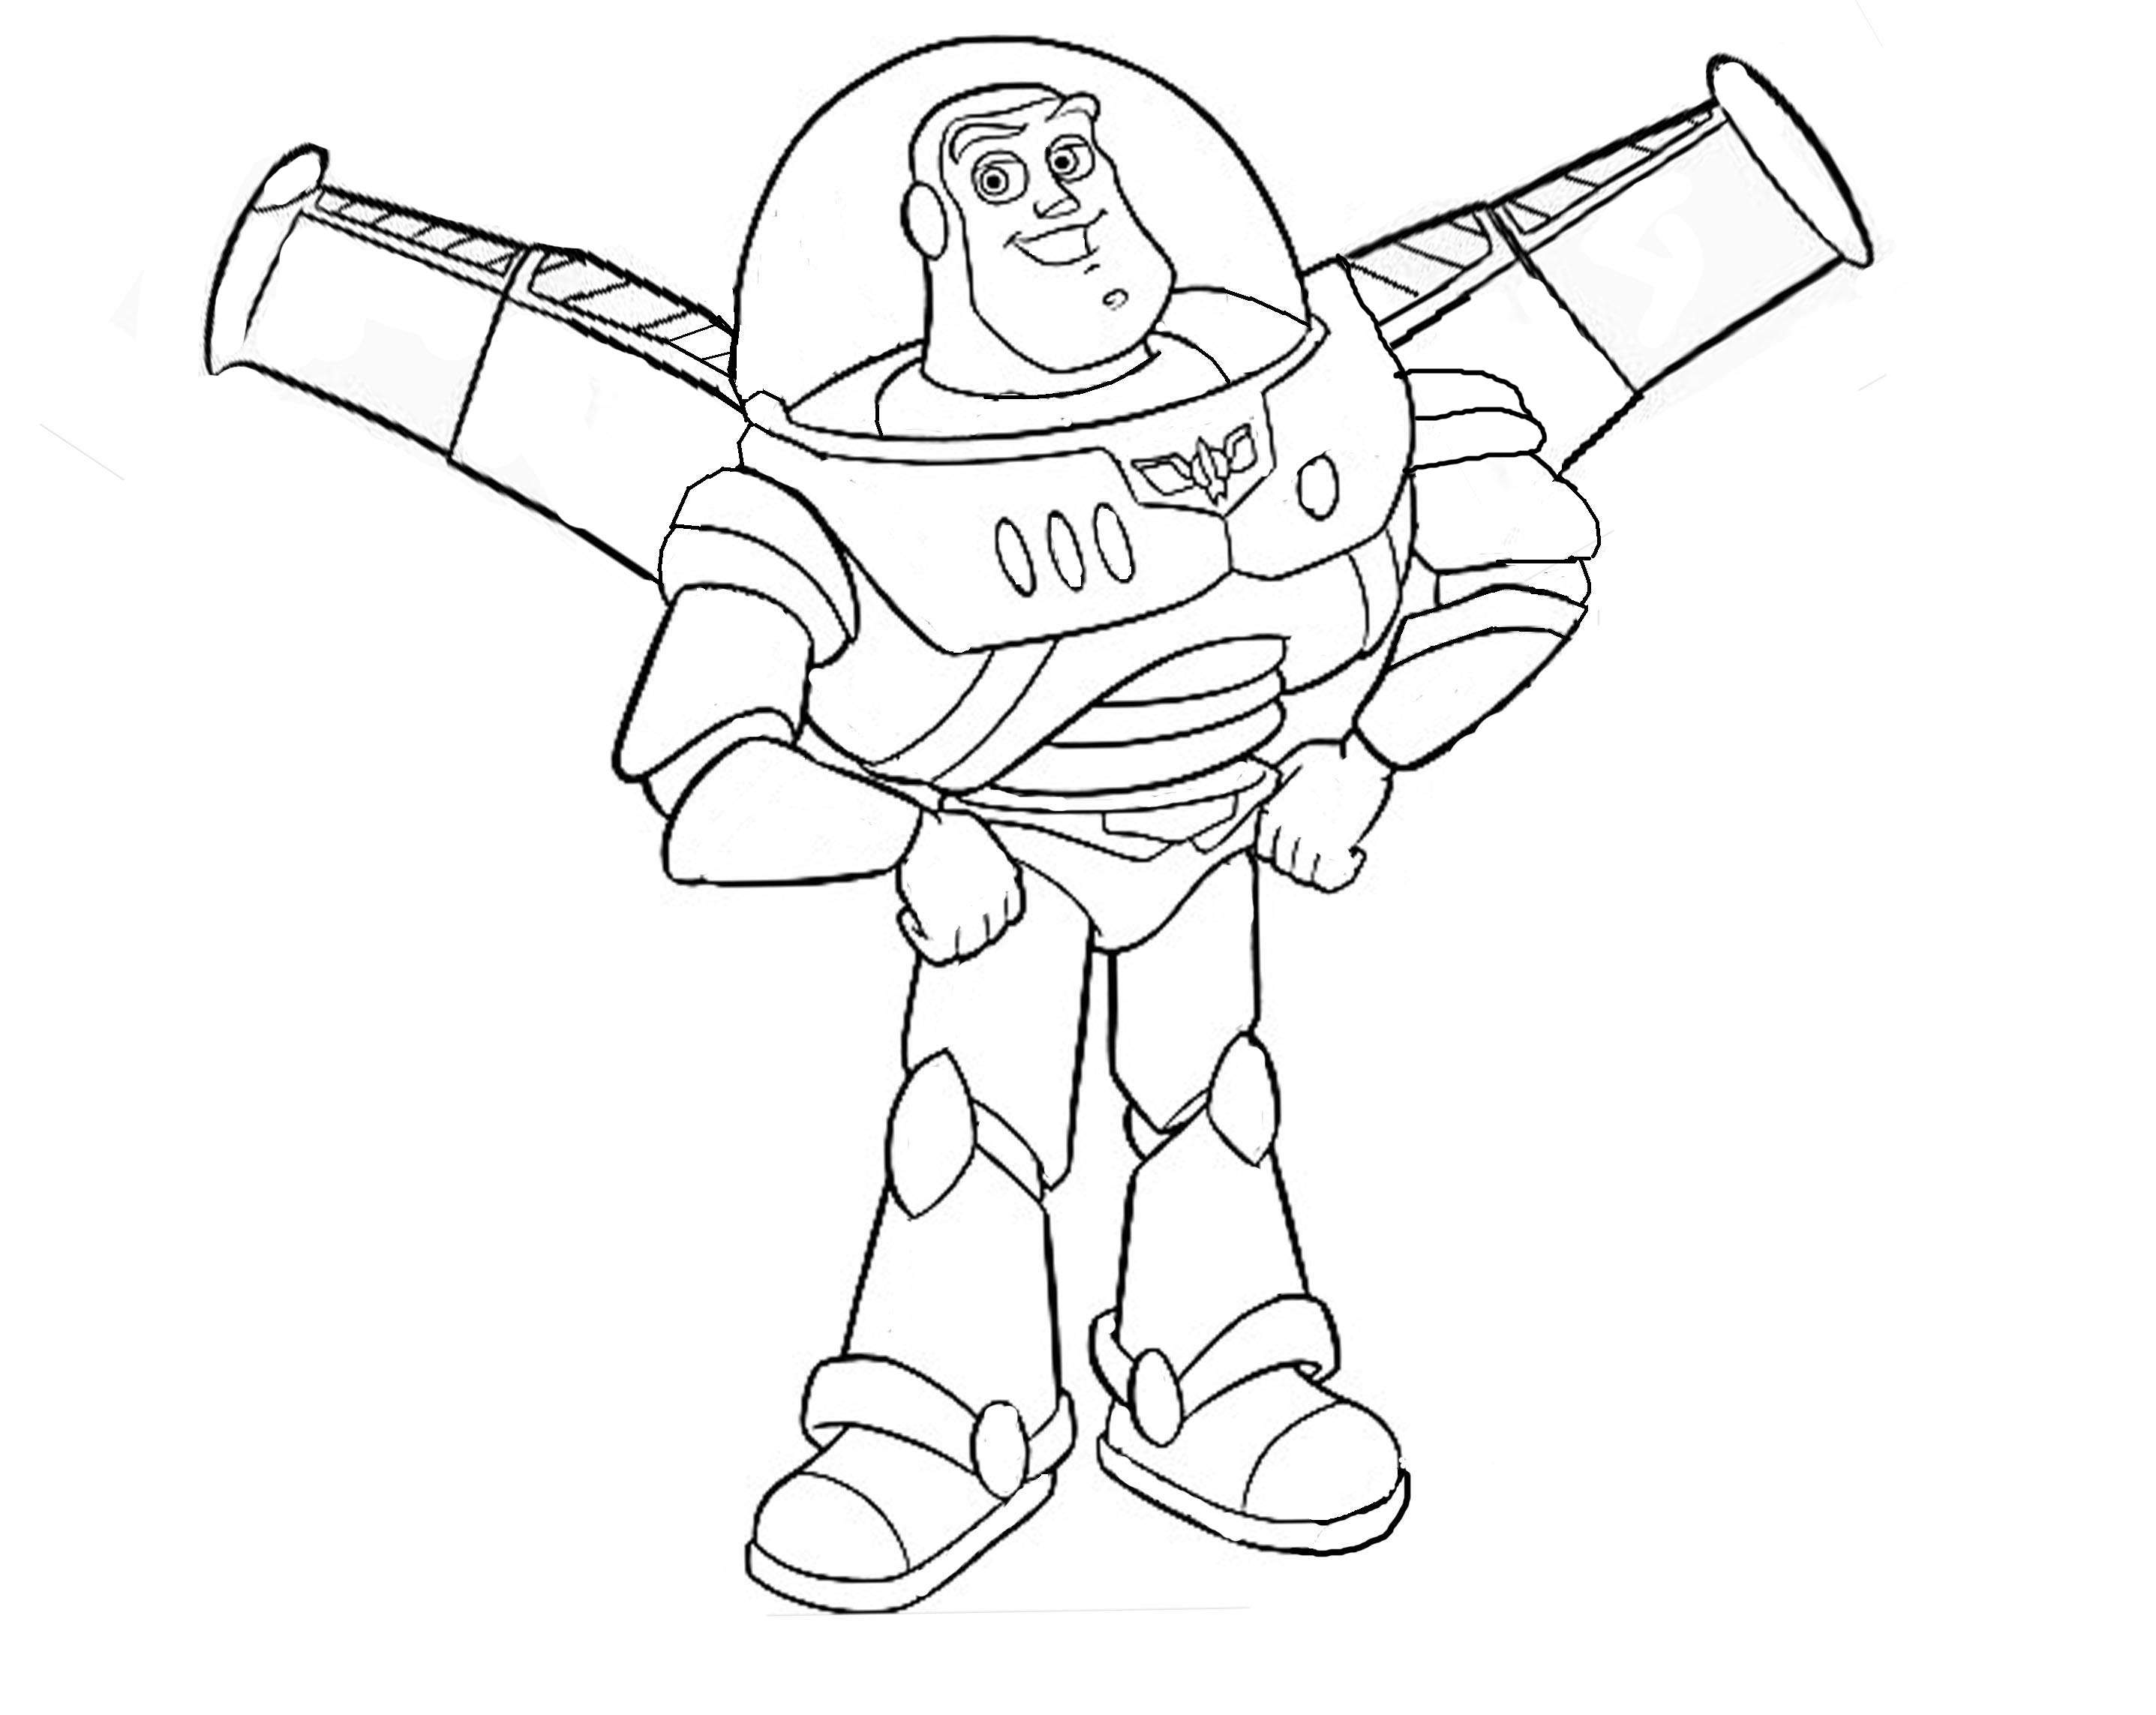 Buzz Lightyear with his wings - Toy Story Kids Coloring Pages